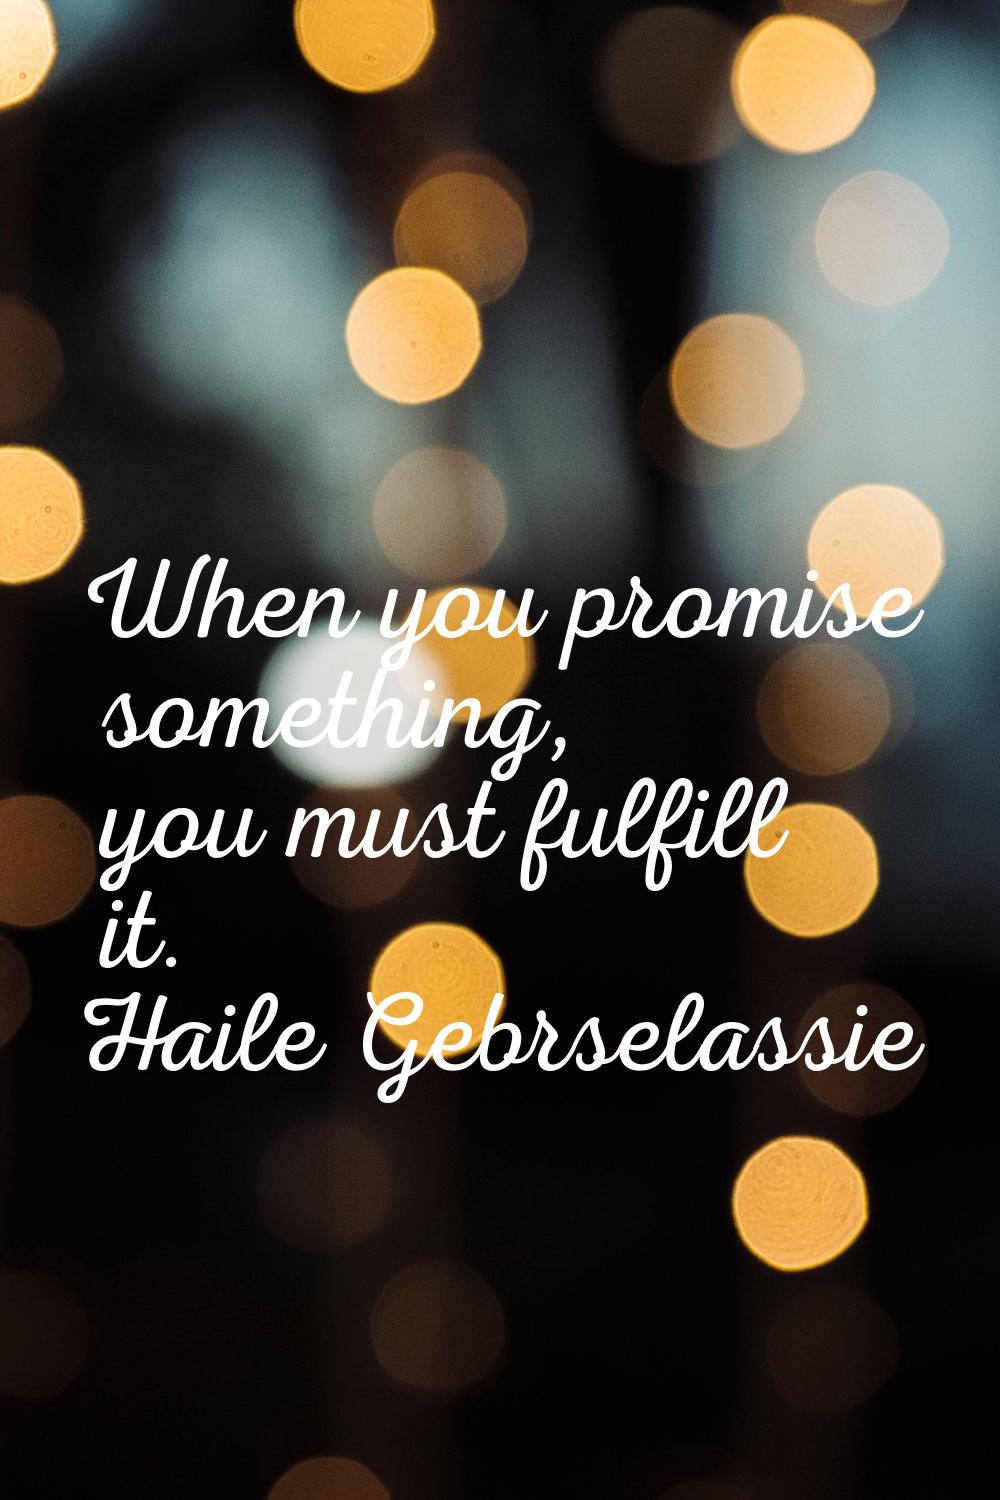 When you promise something, you must fulfill it.